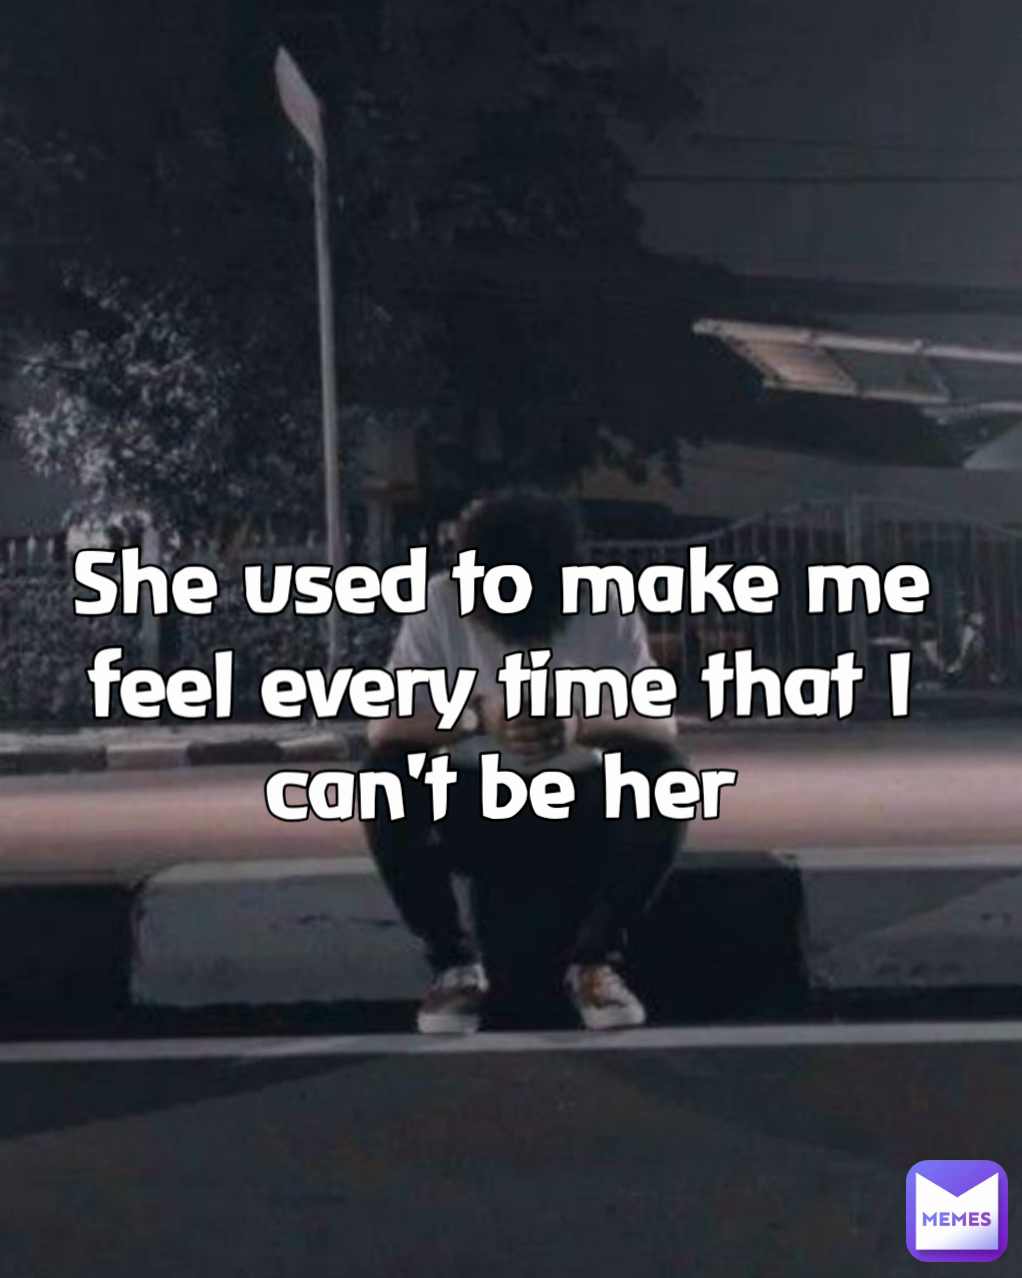 She used to make me feel every time that I can't be her

￼


